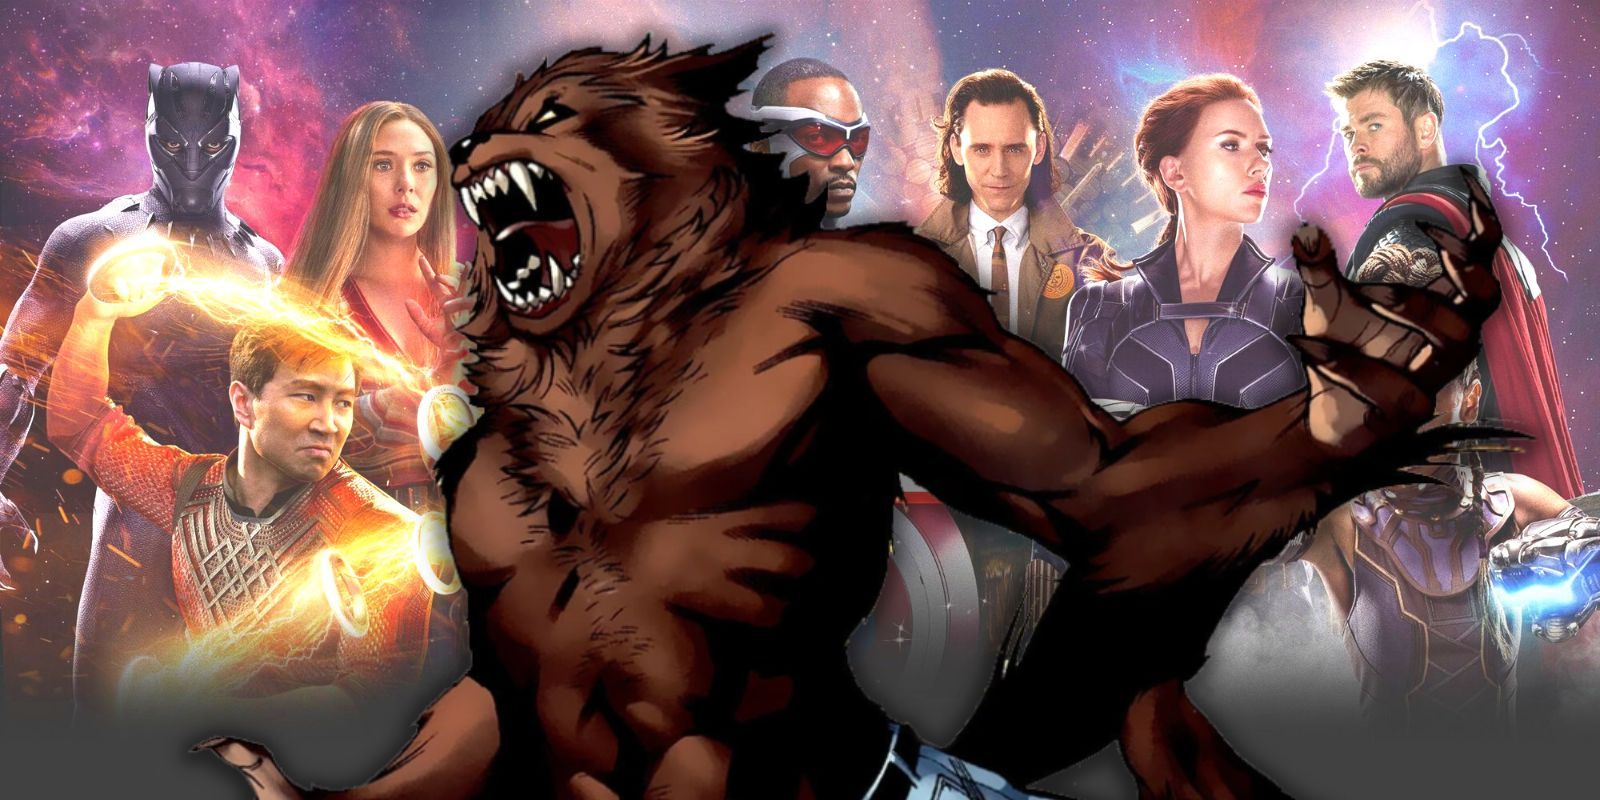 How Powerful Is Werewolf By Night Compared To Other MCU Characters?